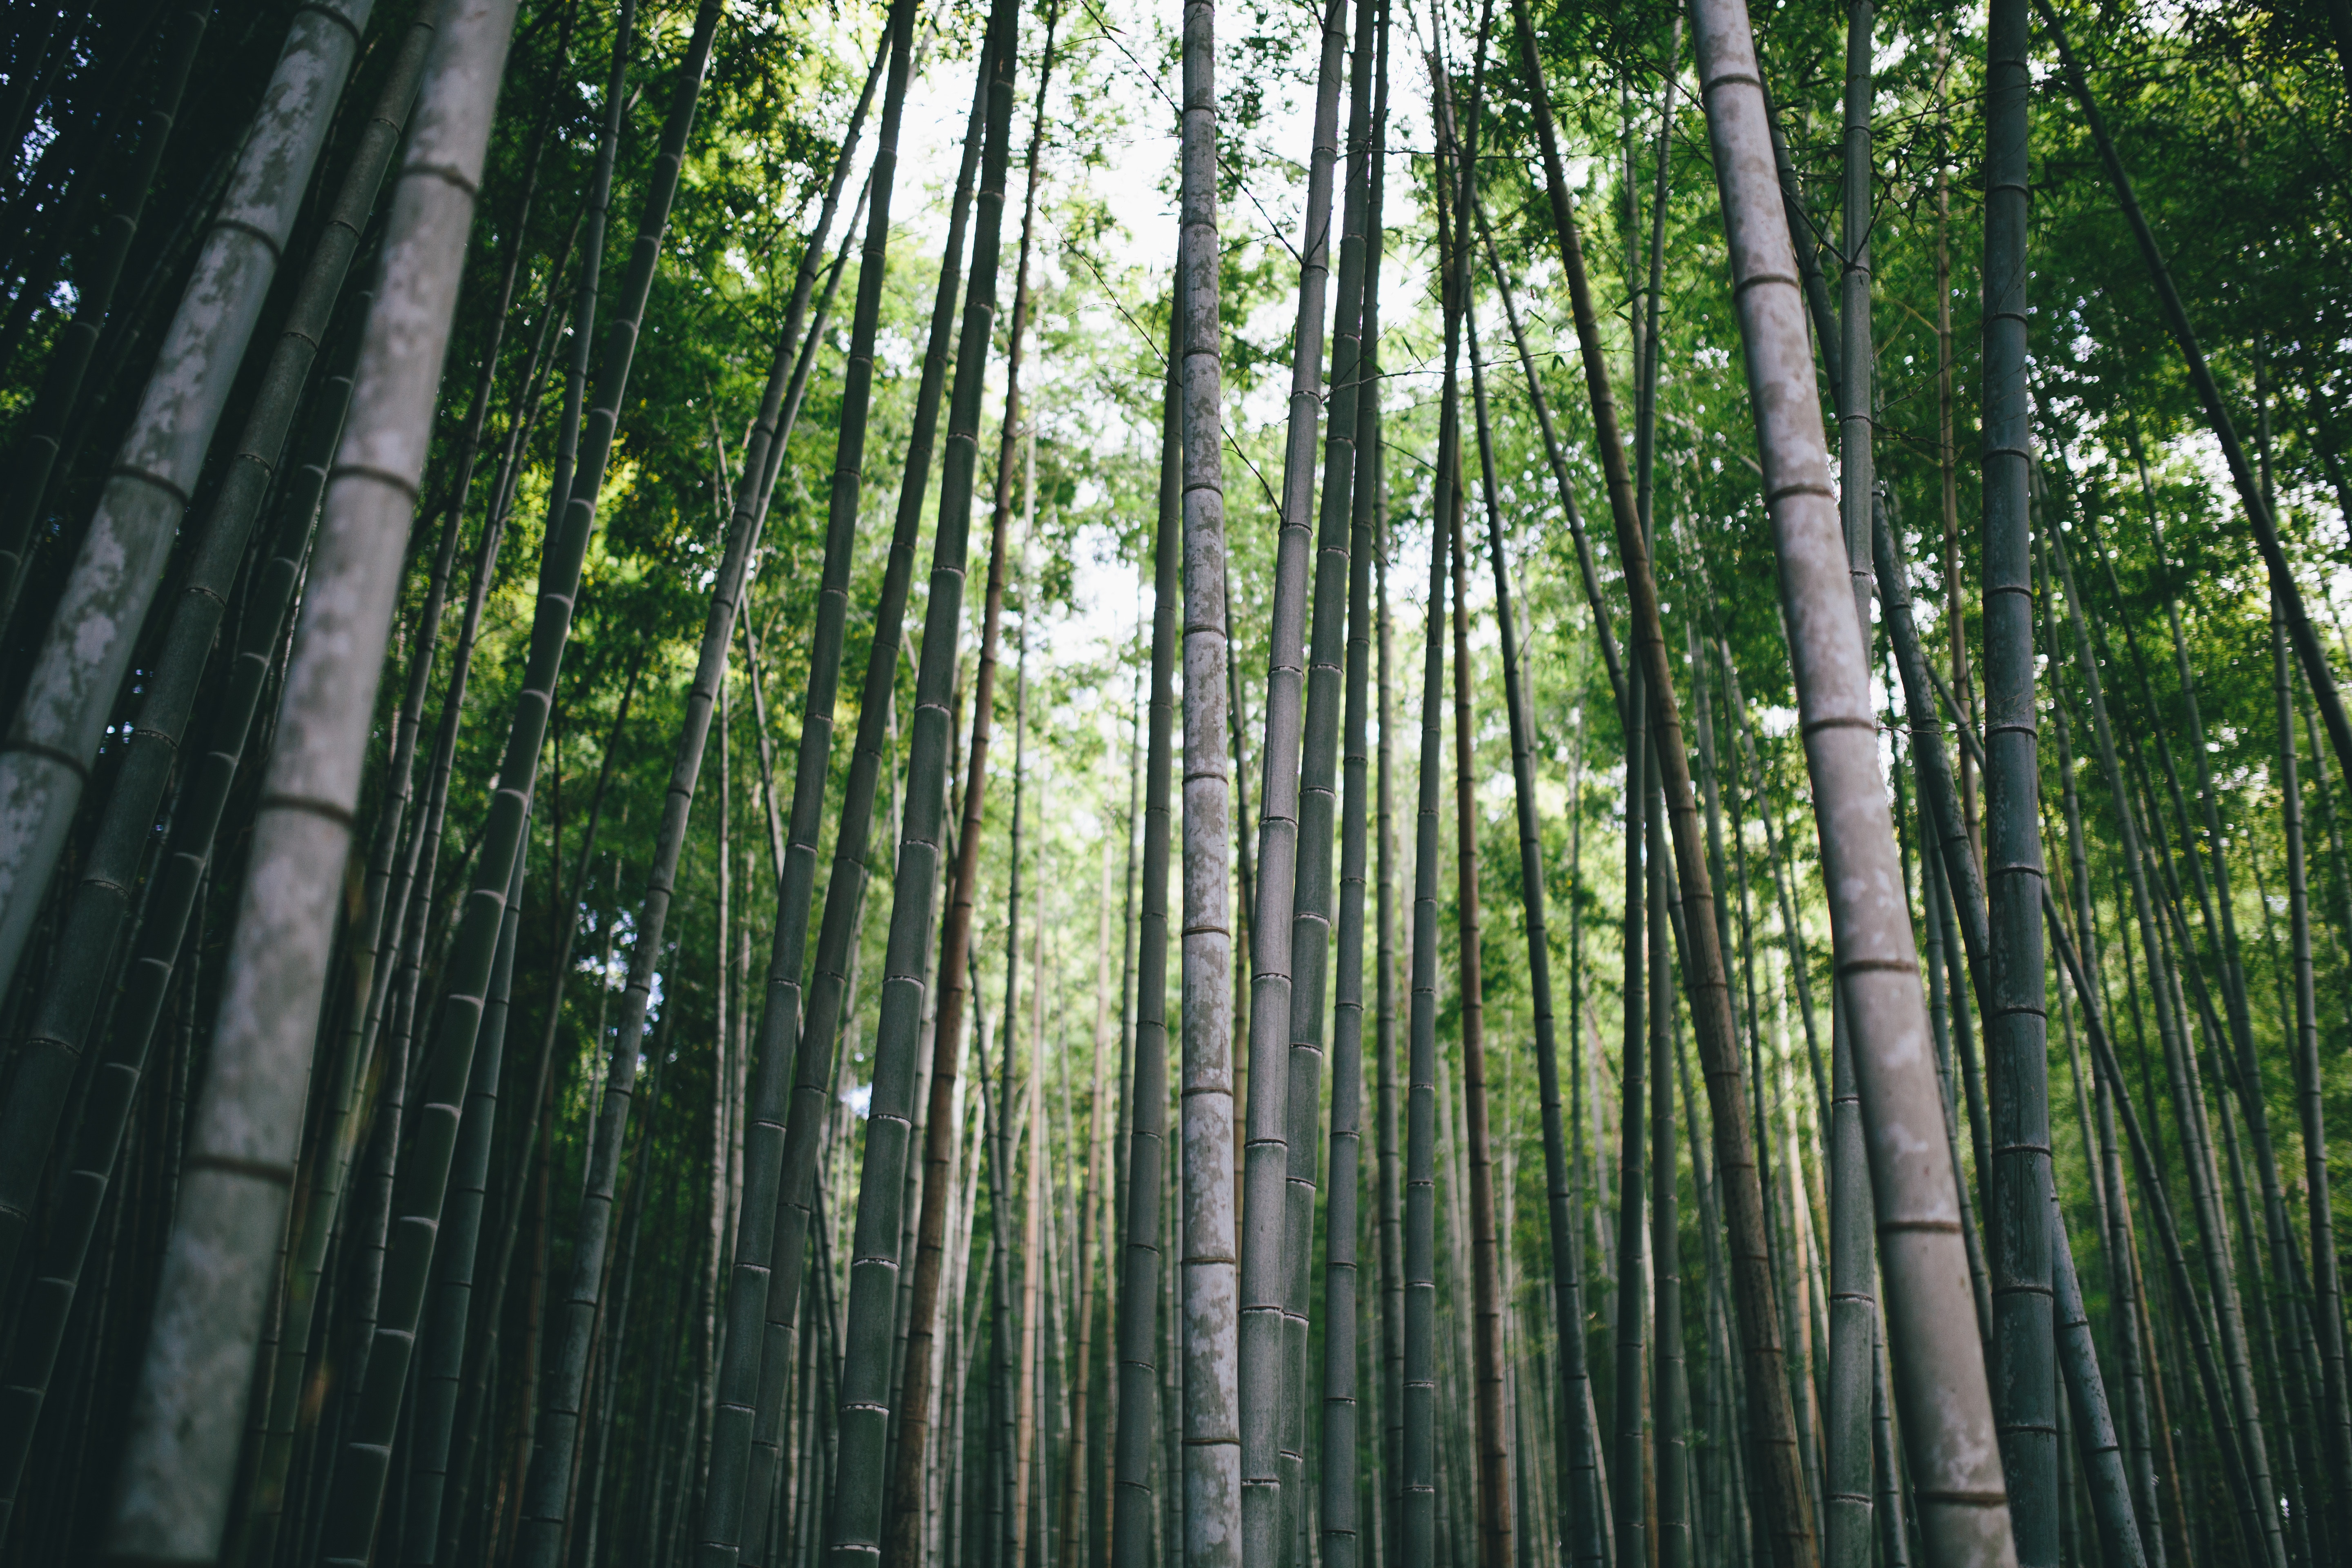 Greg Shield, Photography, Landscape, Nature, Forest, Bamboo, Moso, Japan, Kyoto, Asia, Zen Wallpaper